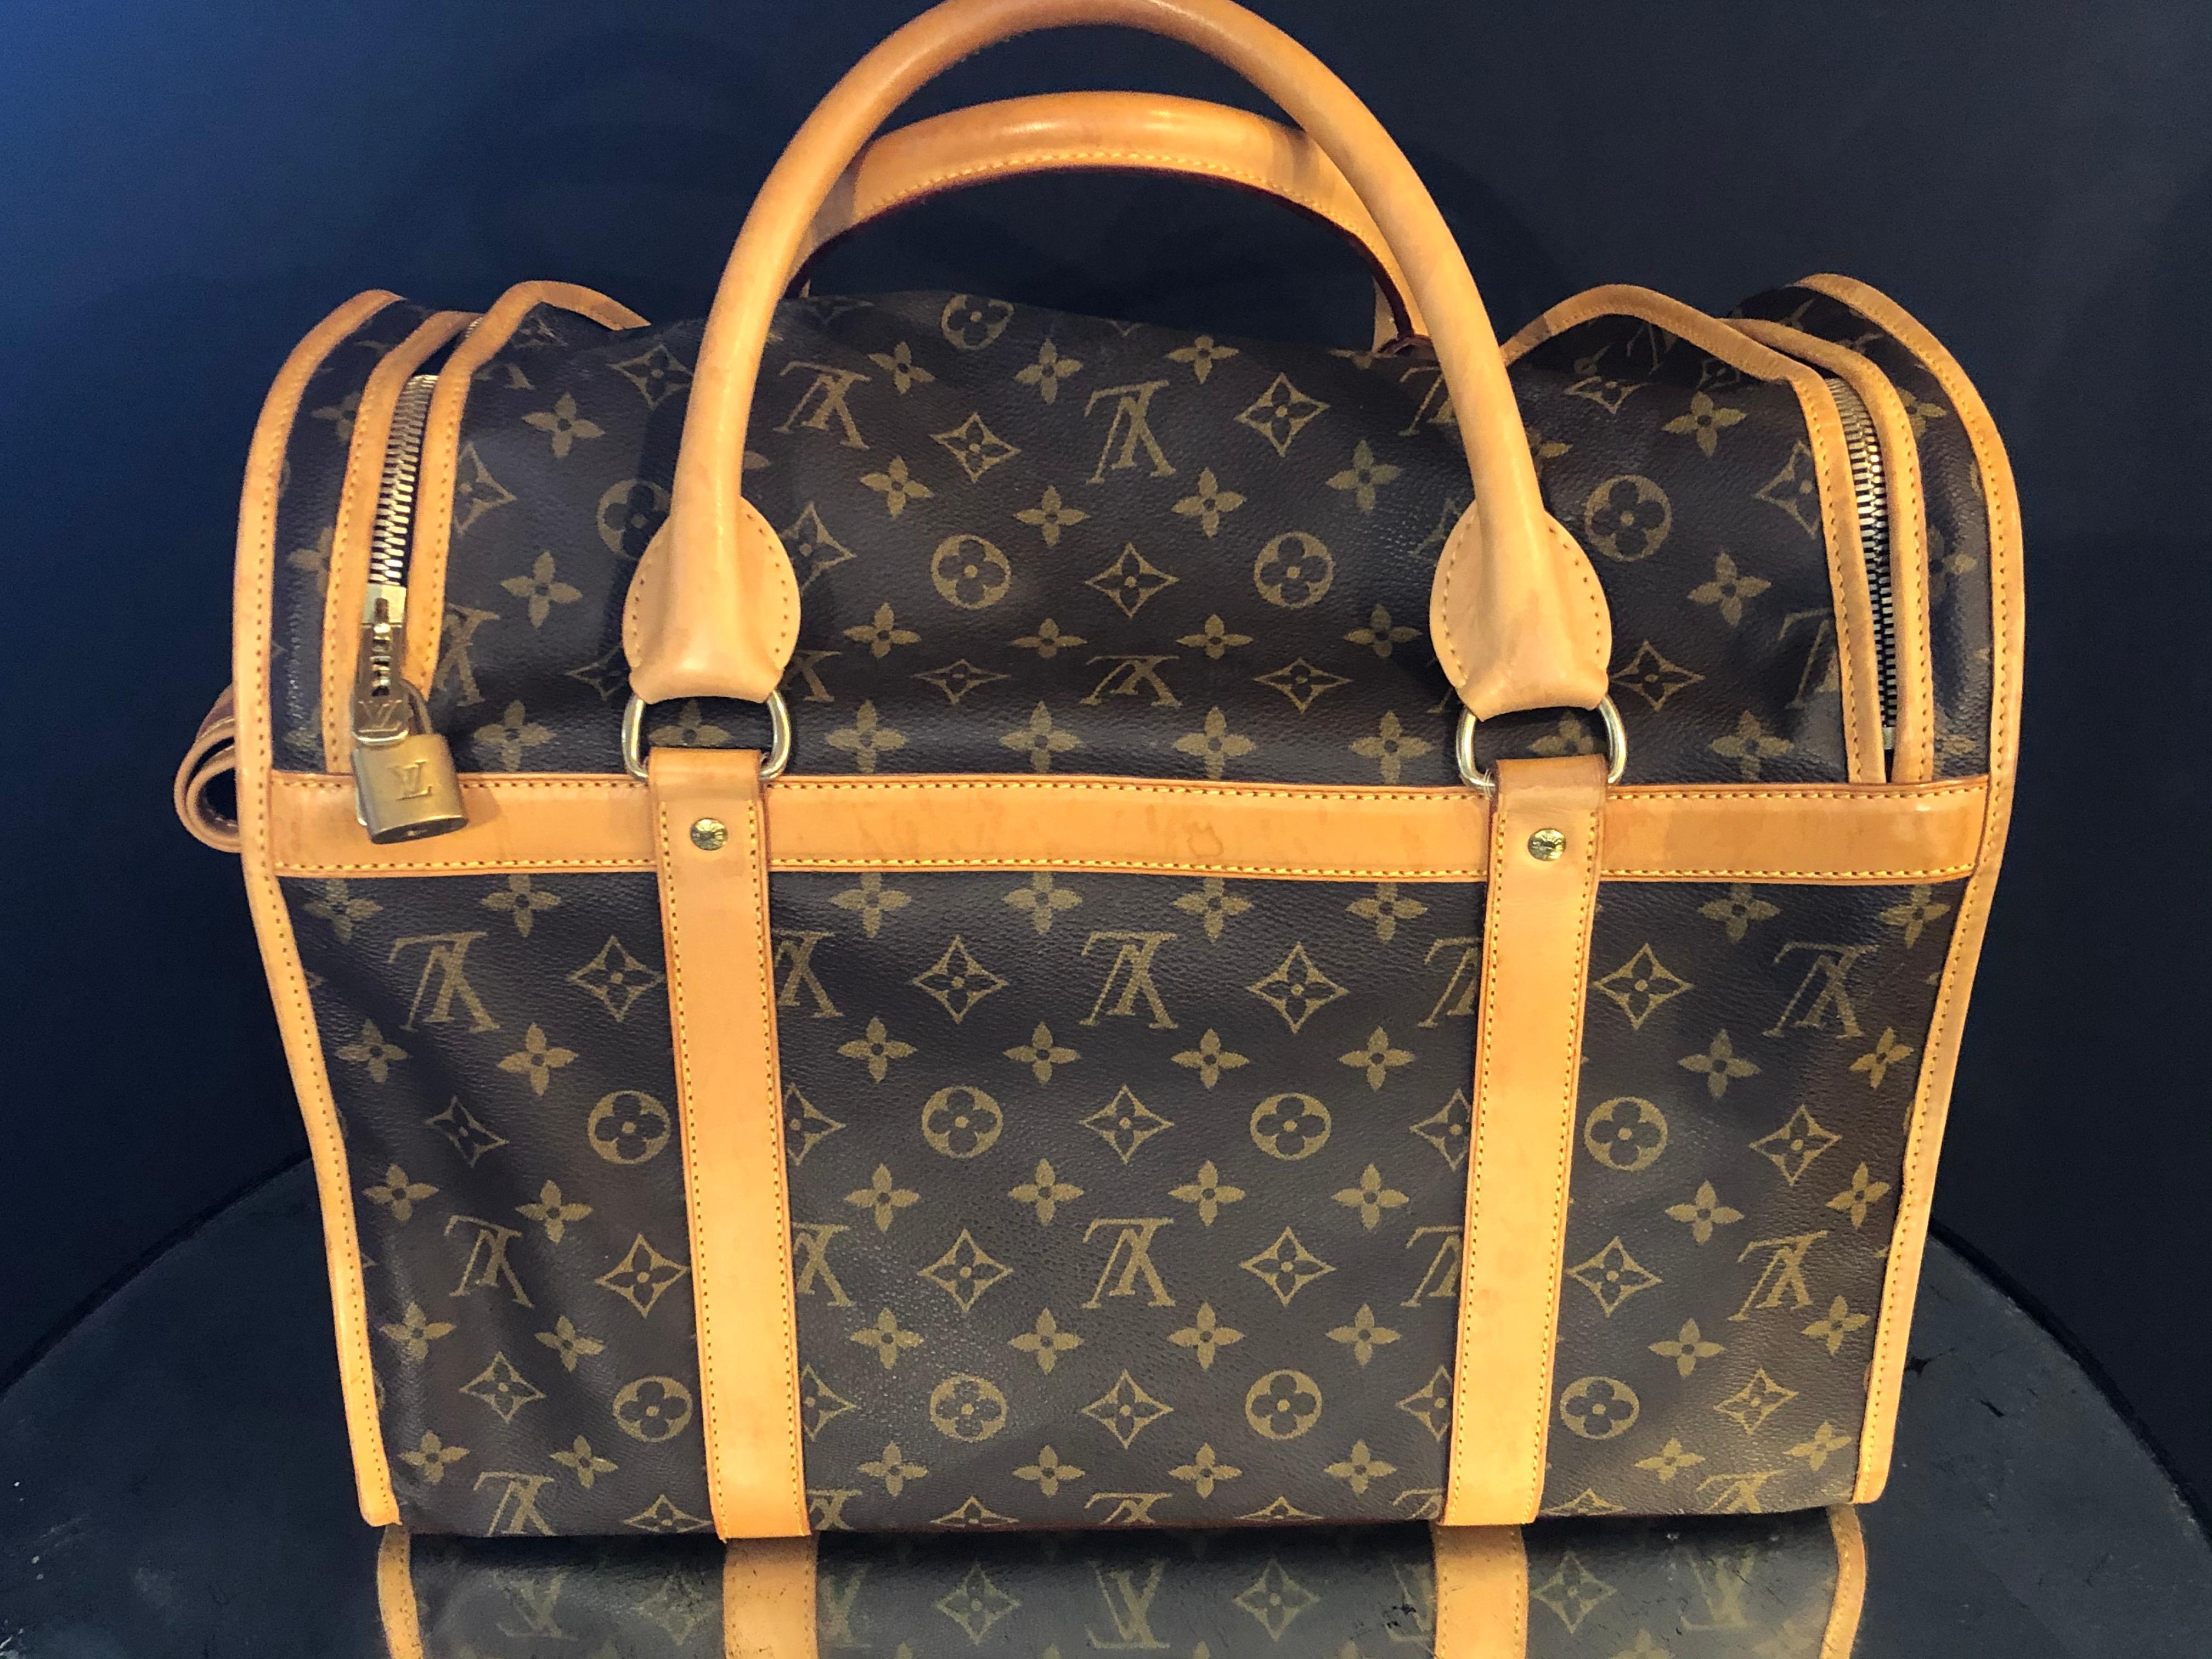 Louis Vuitton dog carrier 40 monogram canvas bag or luggage. This beautiful fine conditioned bag by Louis Vuitton has been used three times according to its prior owner. The bag is equipped with a breathable mesh window. Any dog would look classy